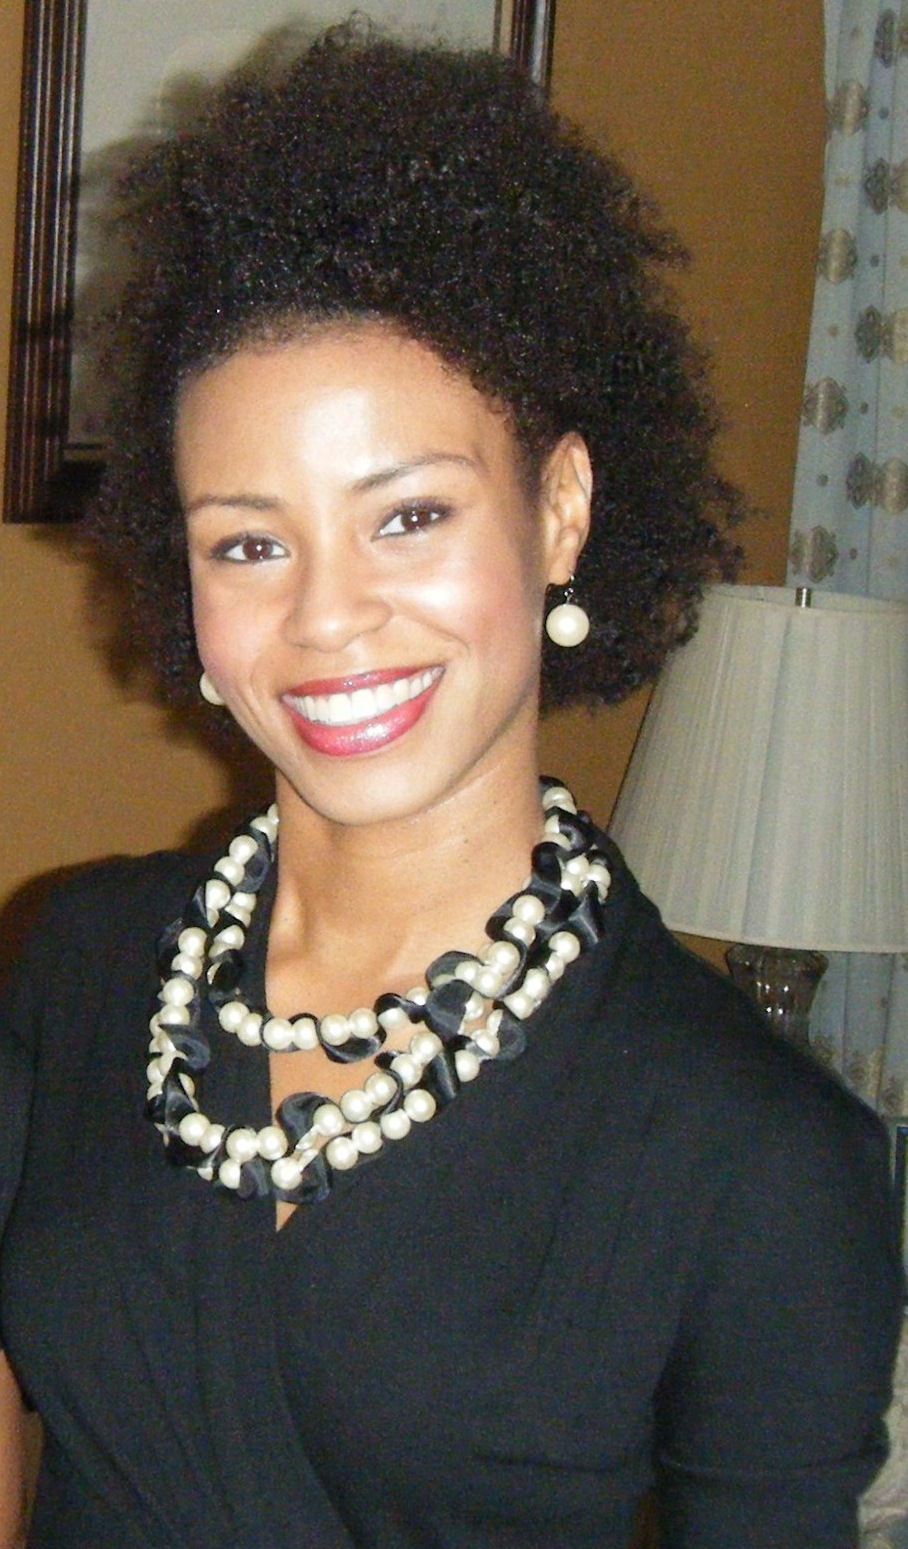 Marla at a party in 2010